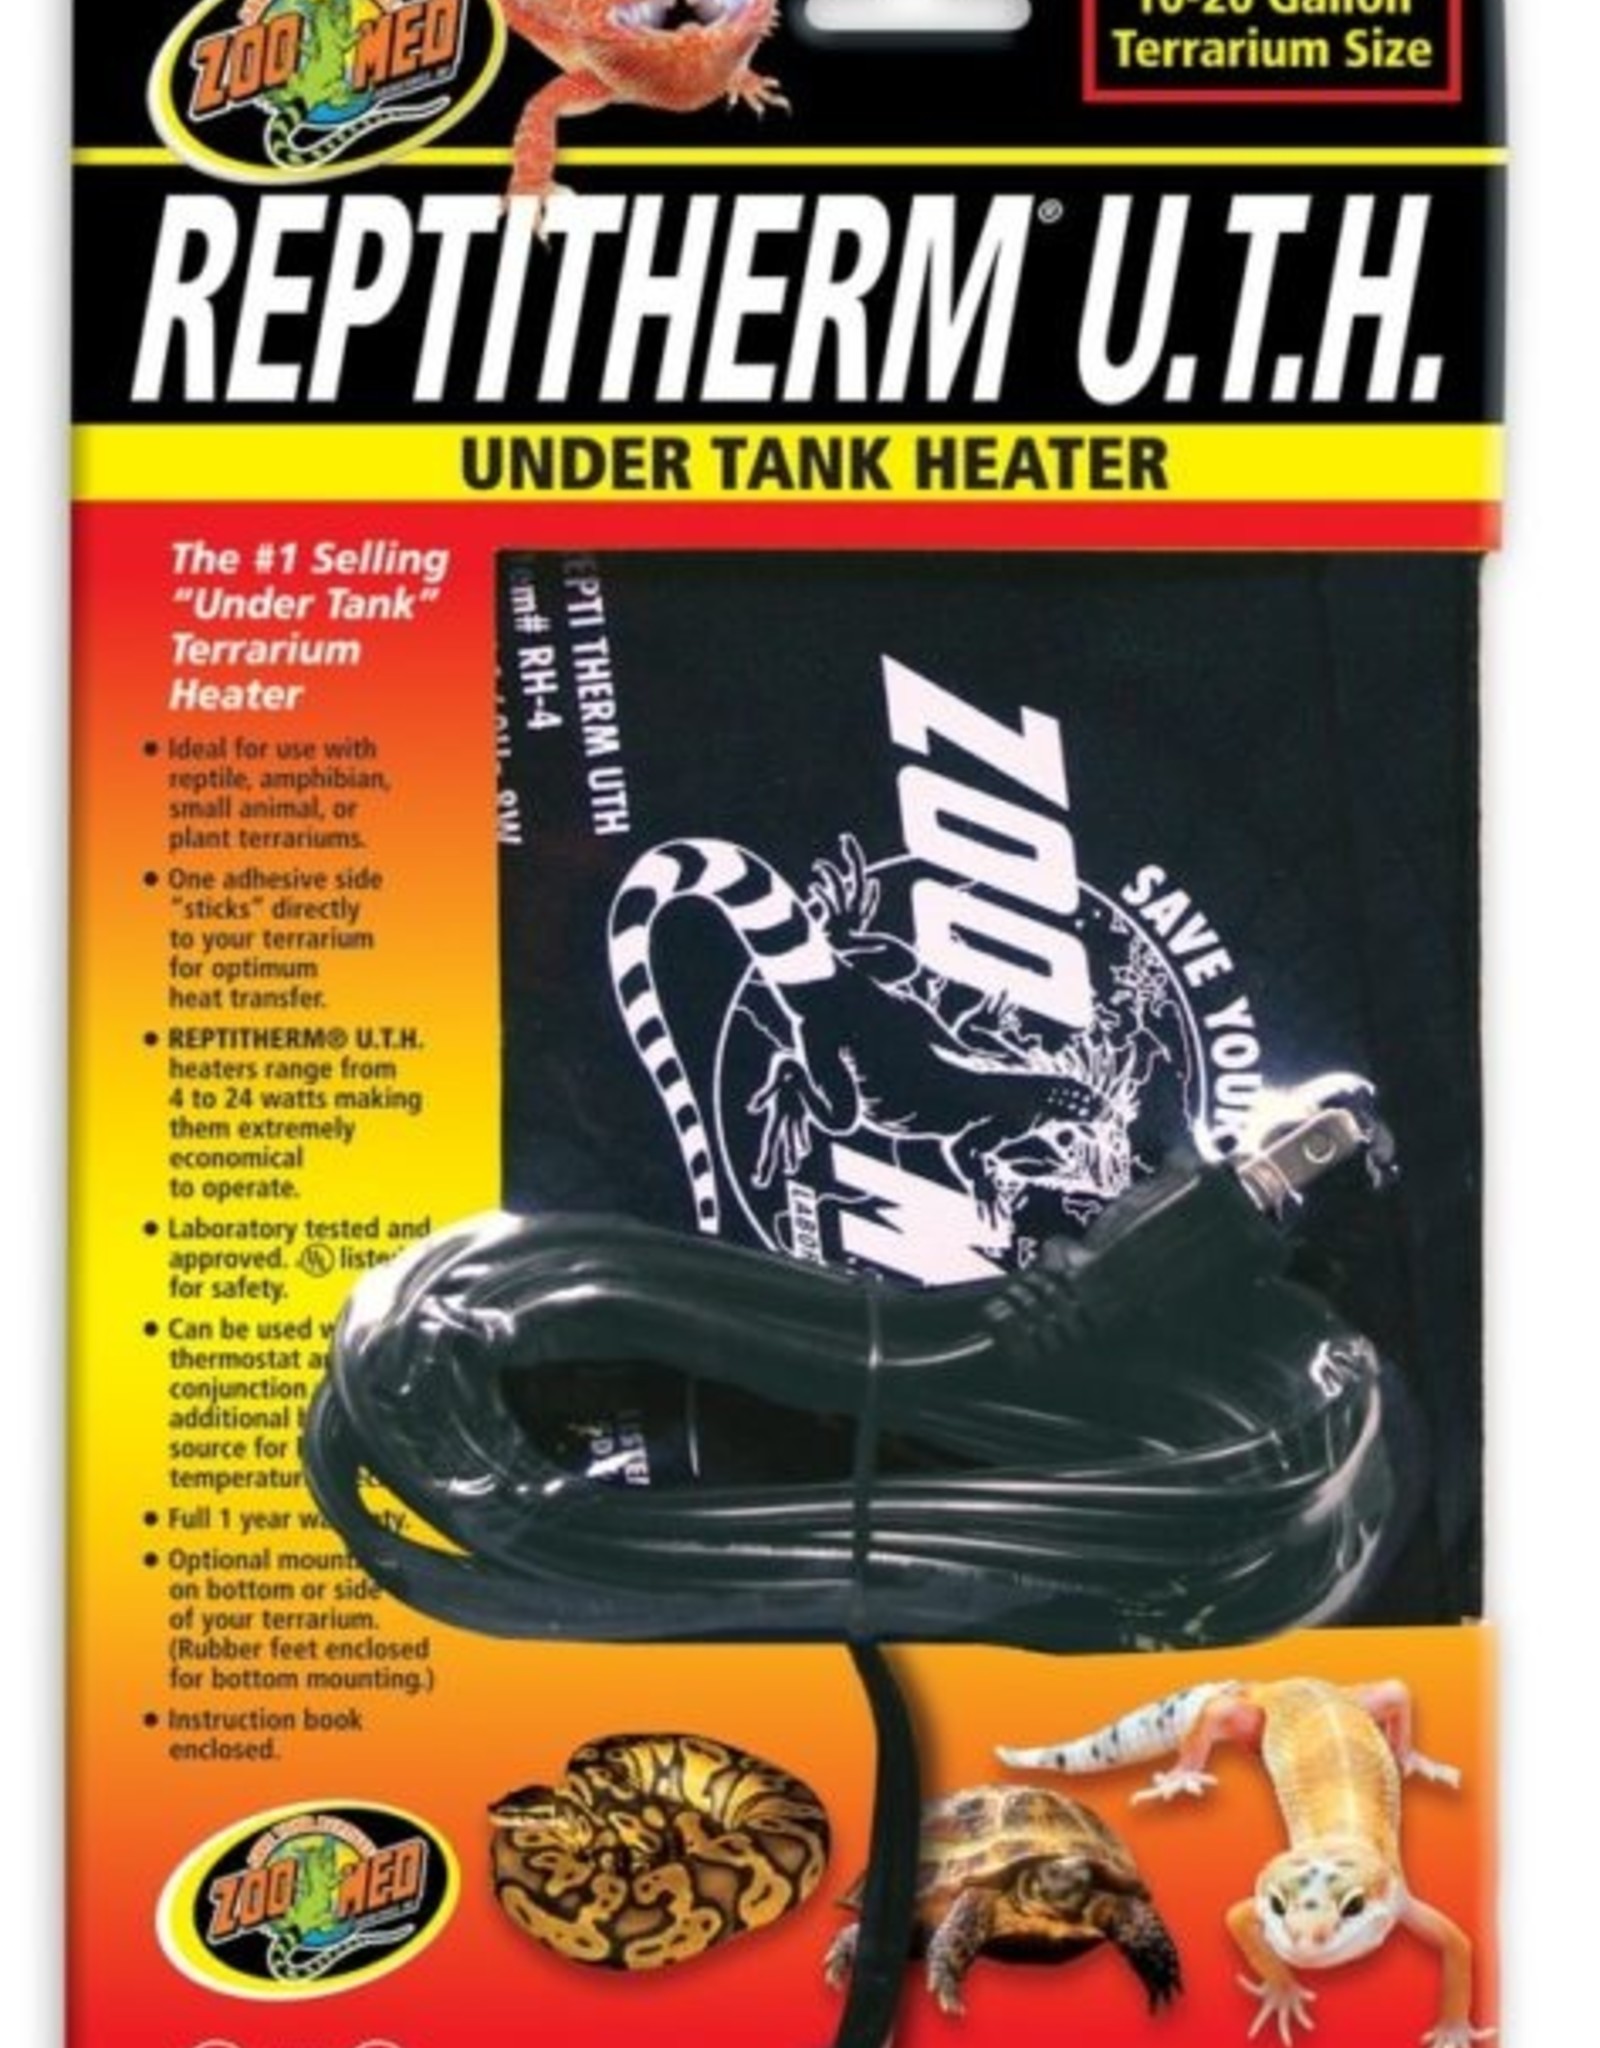 ZOO MED LABS INC ZOOMED REPTITHERM UNDERTANK HEATER